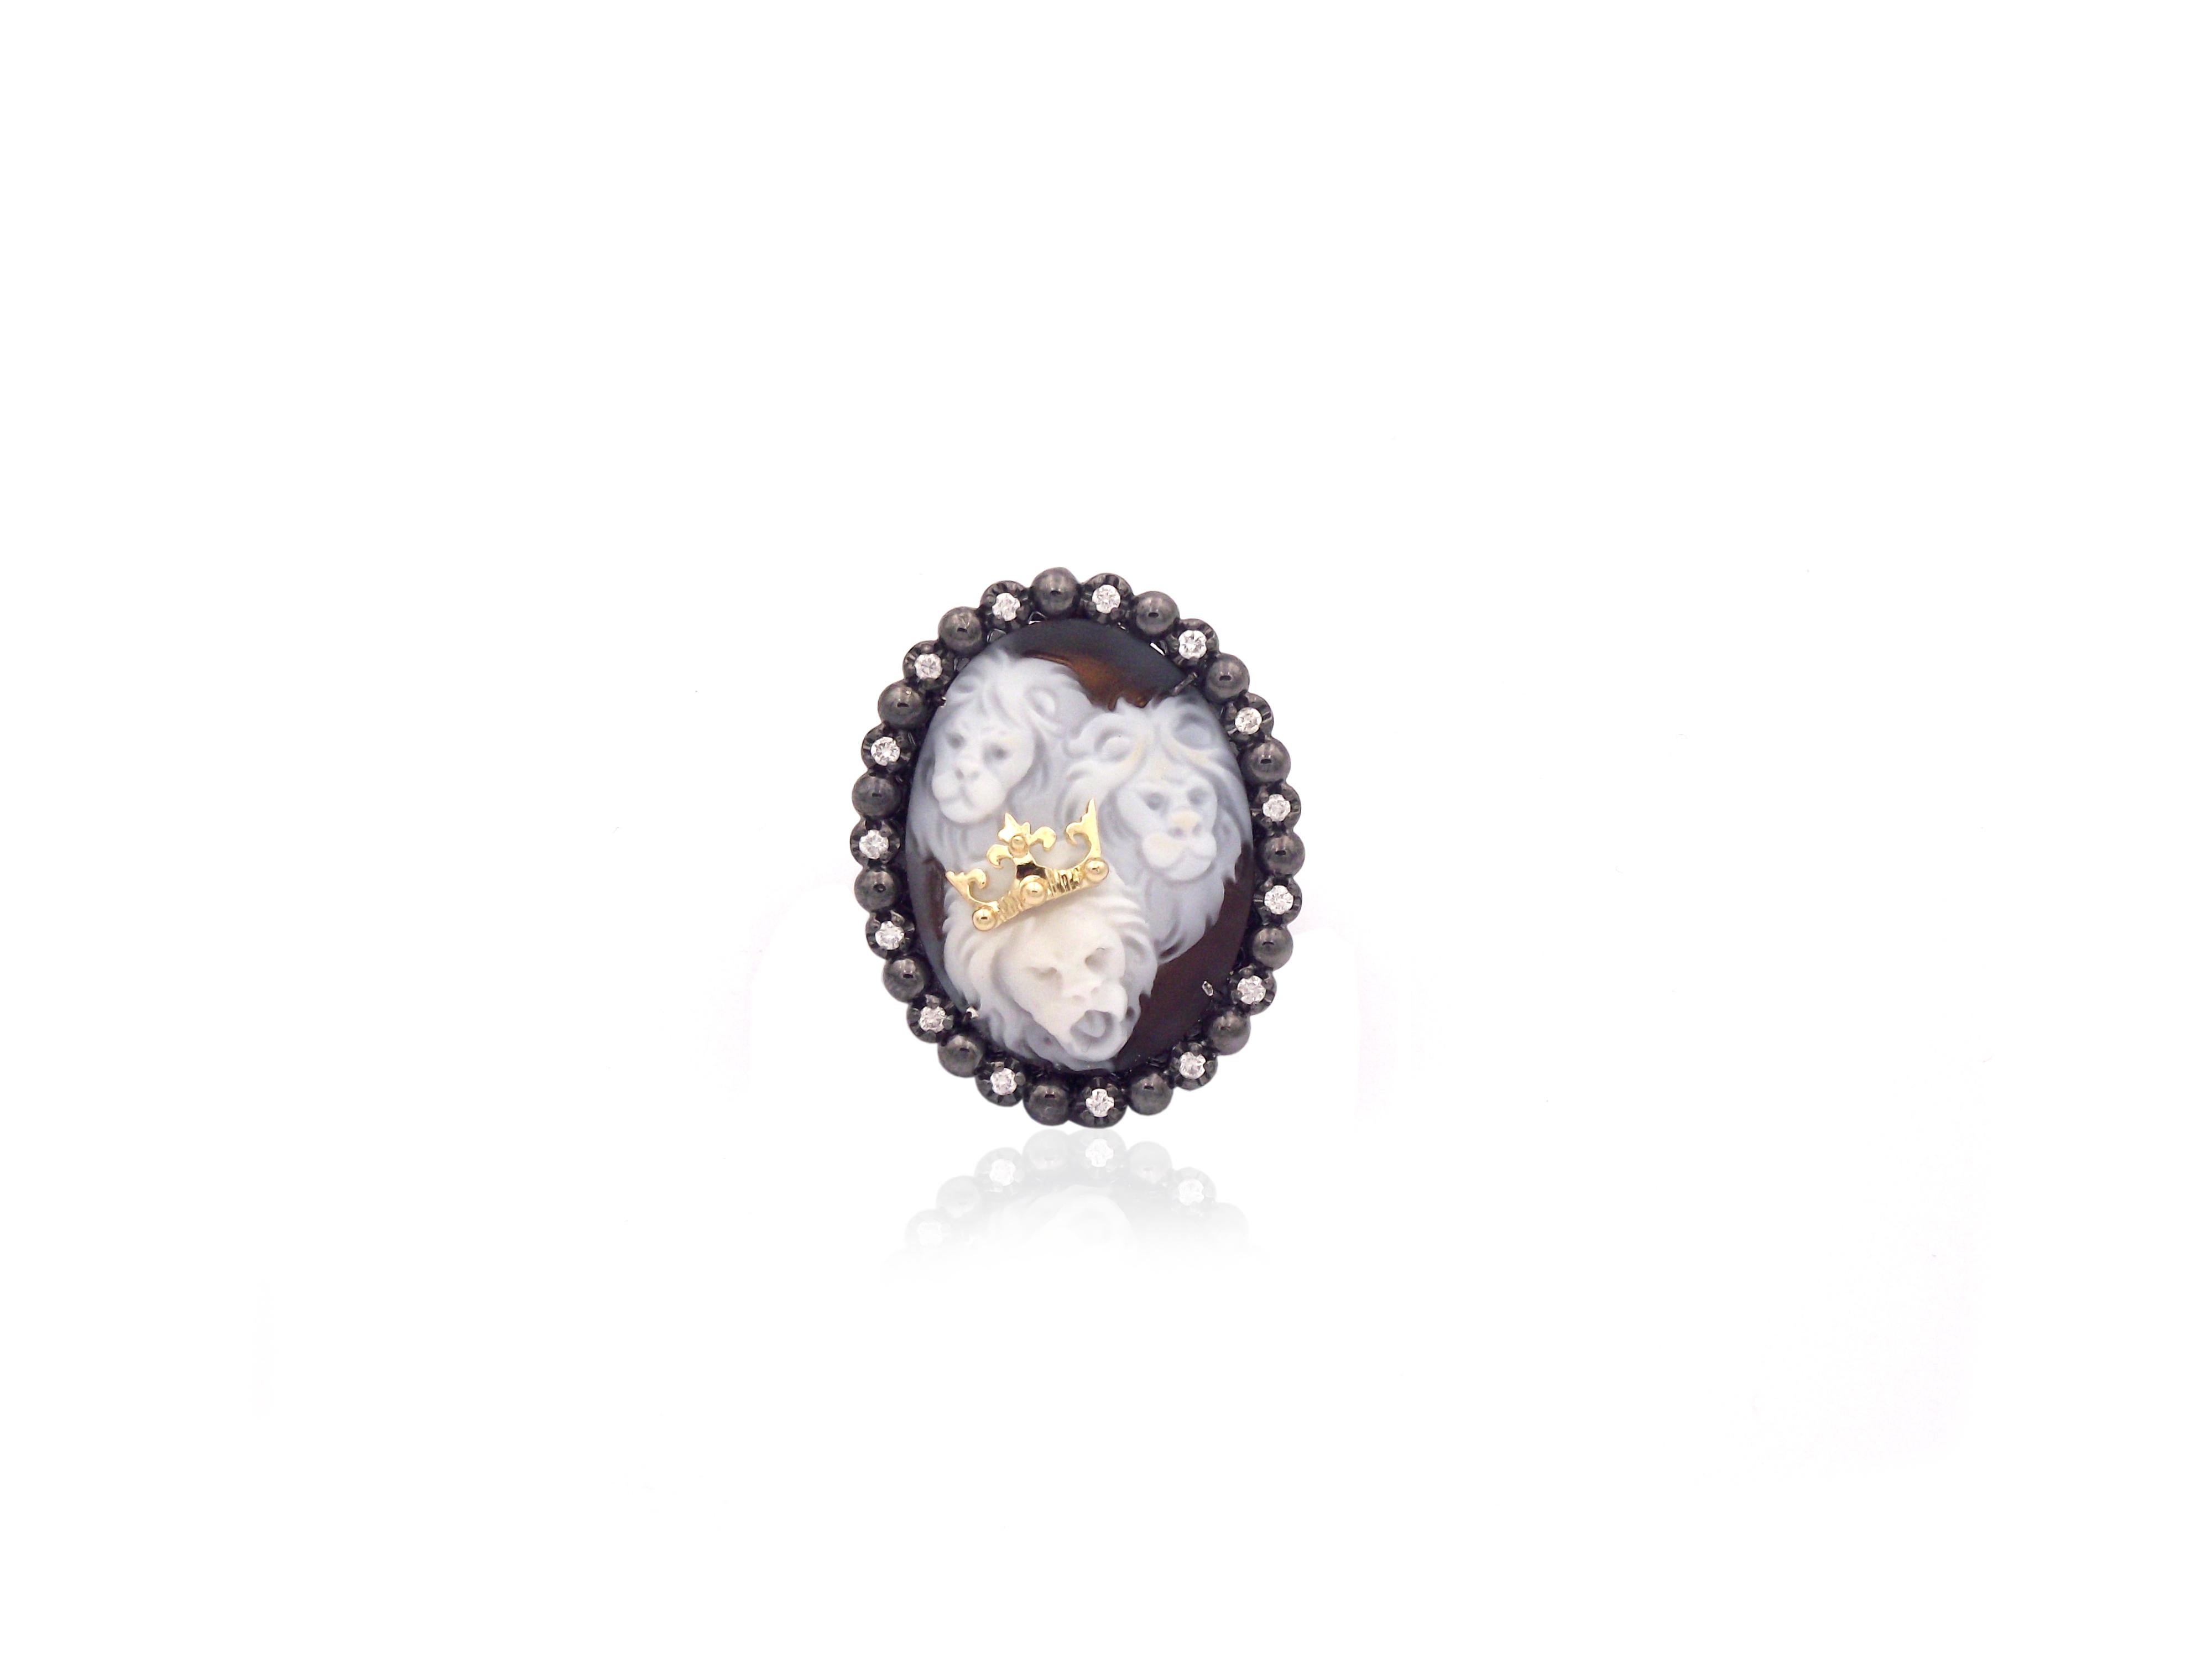  25mm sardonyx shell cameo hand-carved, set on 18kt and sterling silver black rhodium plated with 0.30cts of white diamonds and 0.10cts of rose cut white diamonds